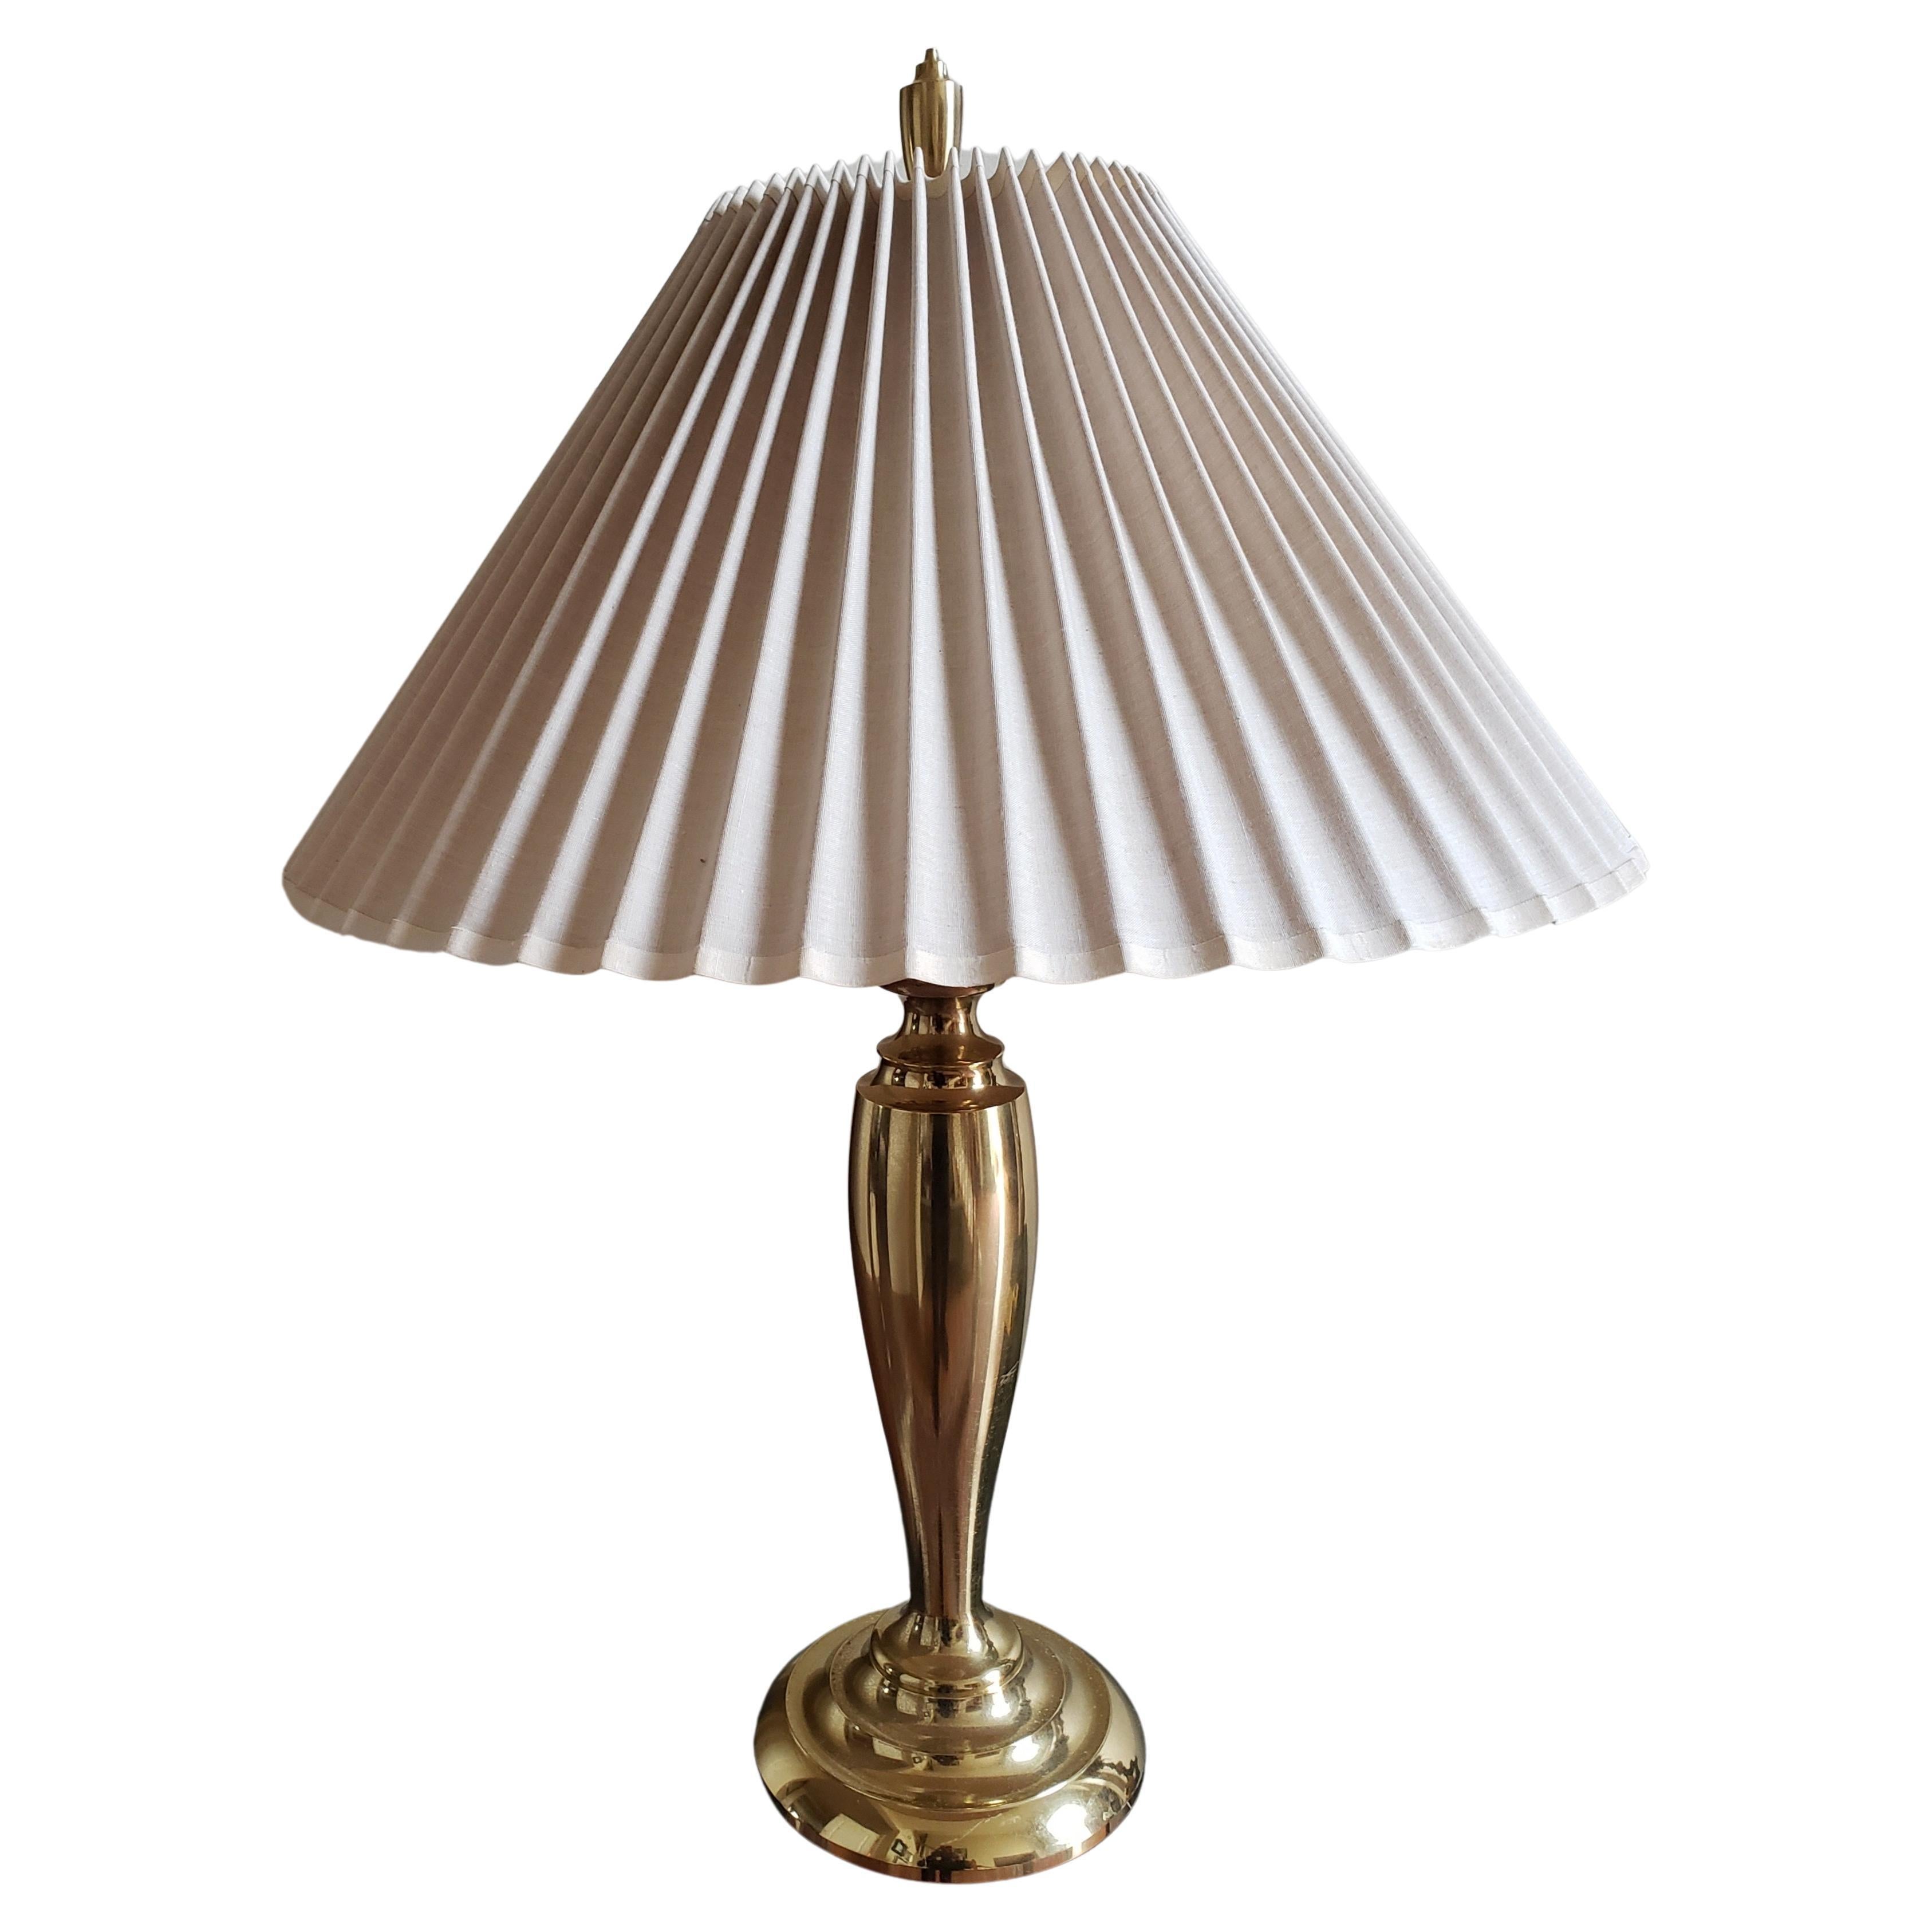 Vintage Stiffel solid crackle brass MCM Hollywood Regency lamp in the form of a trophy. Comes with original harp and heavy solid brass finial. Good vintage condition.

W3LR040622.
 